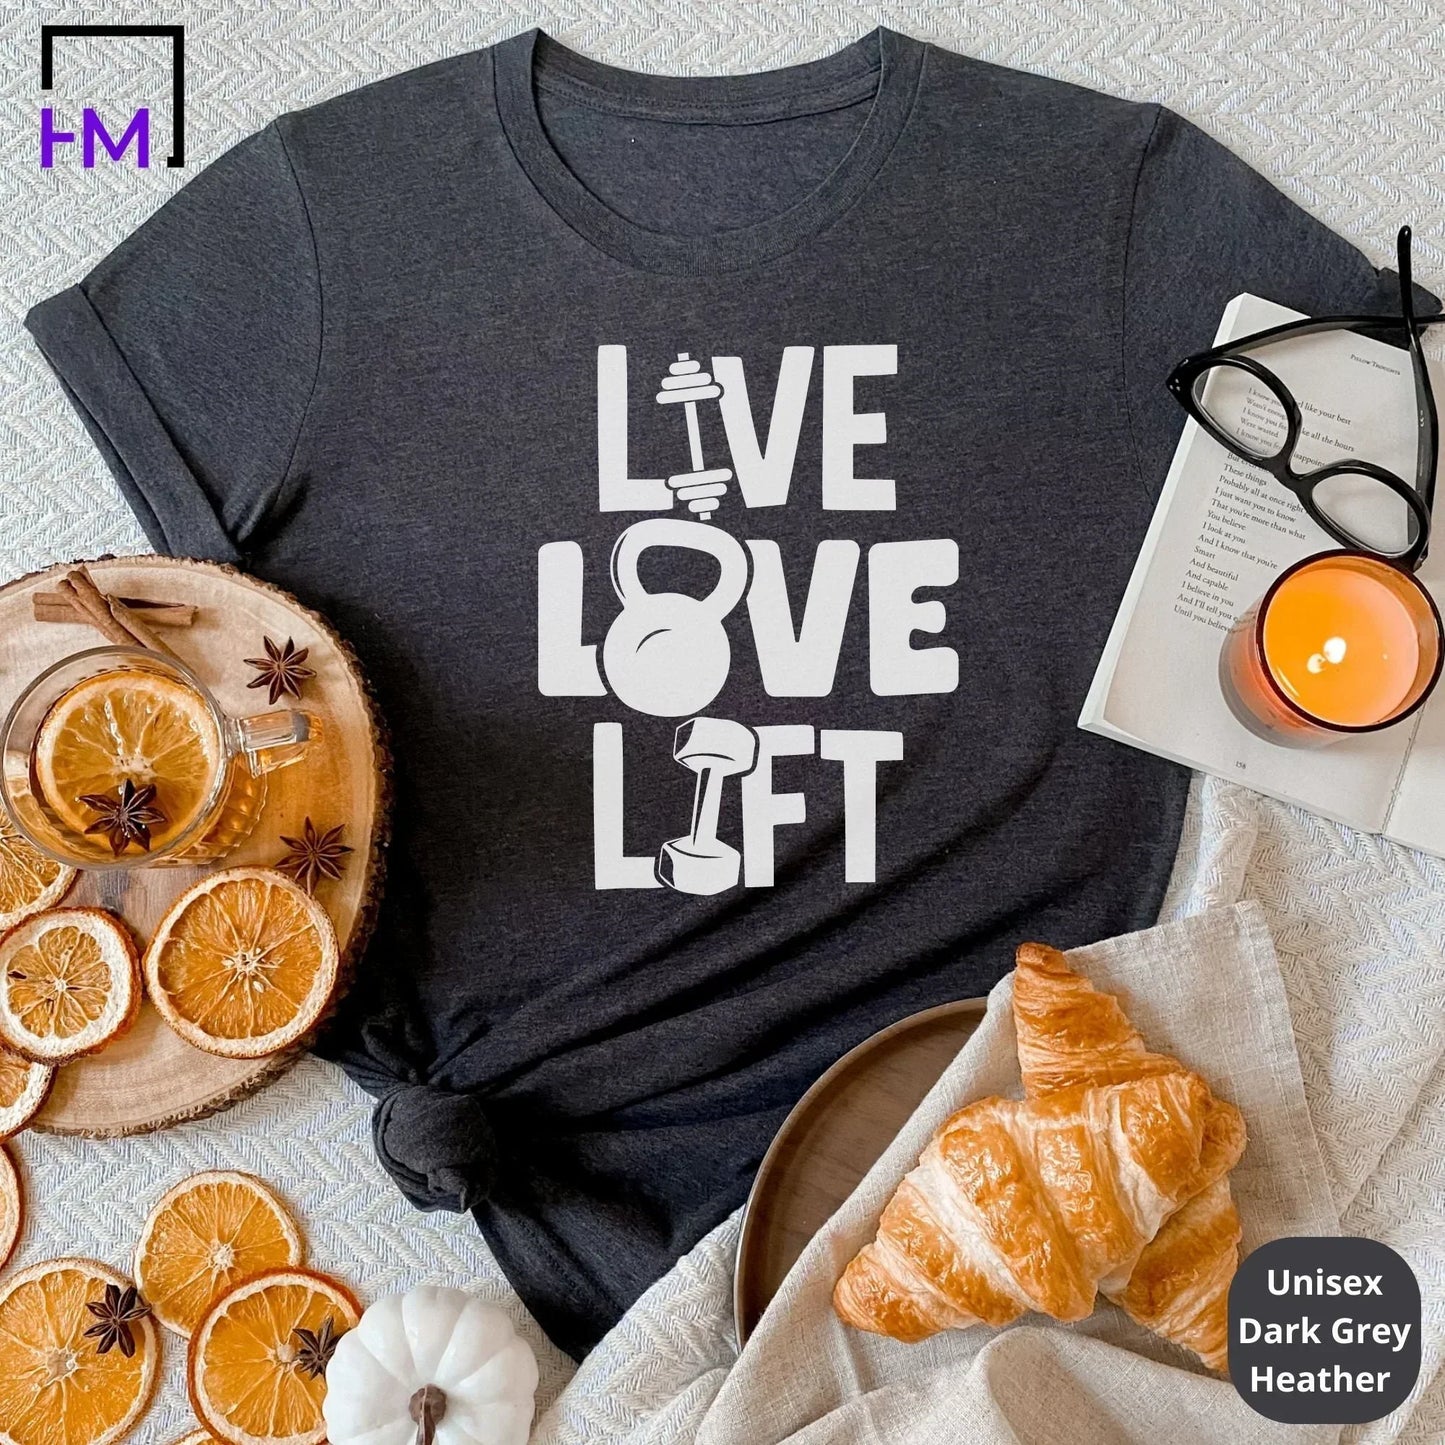 Gym Lover Gifts For Men Women Left Gym To Be Here T-Shirt